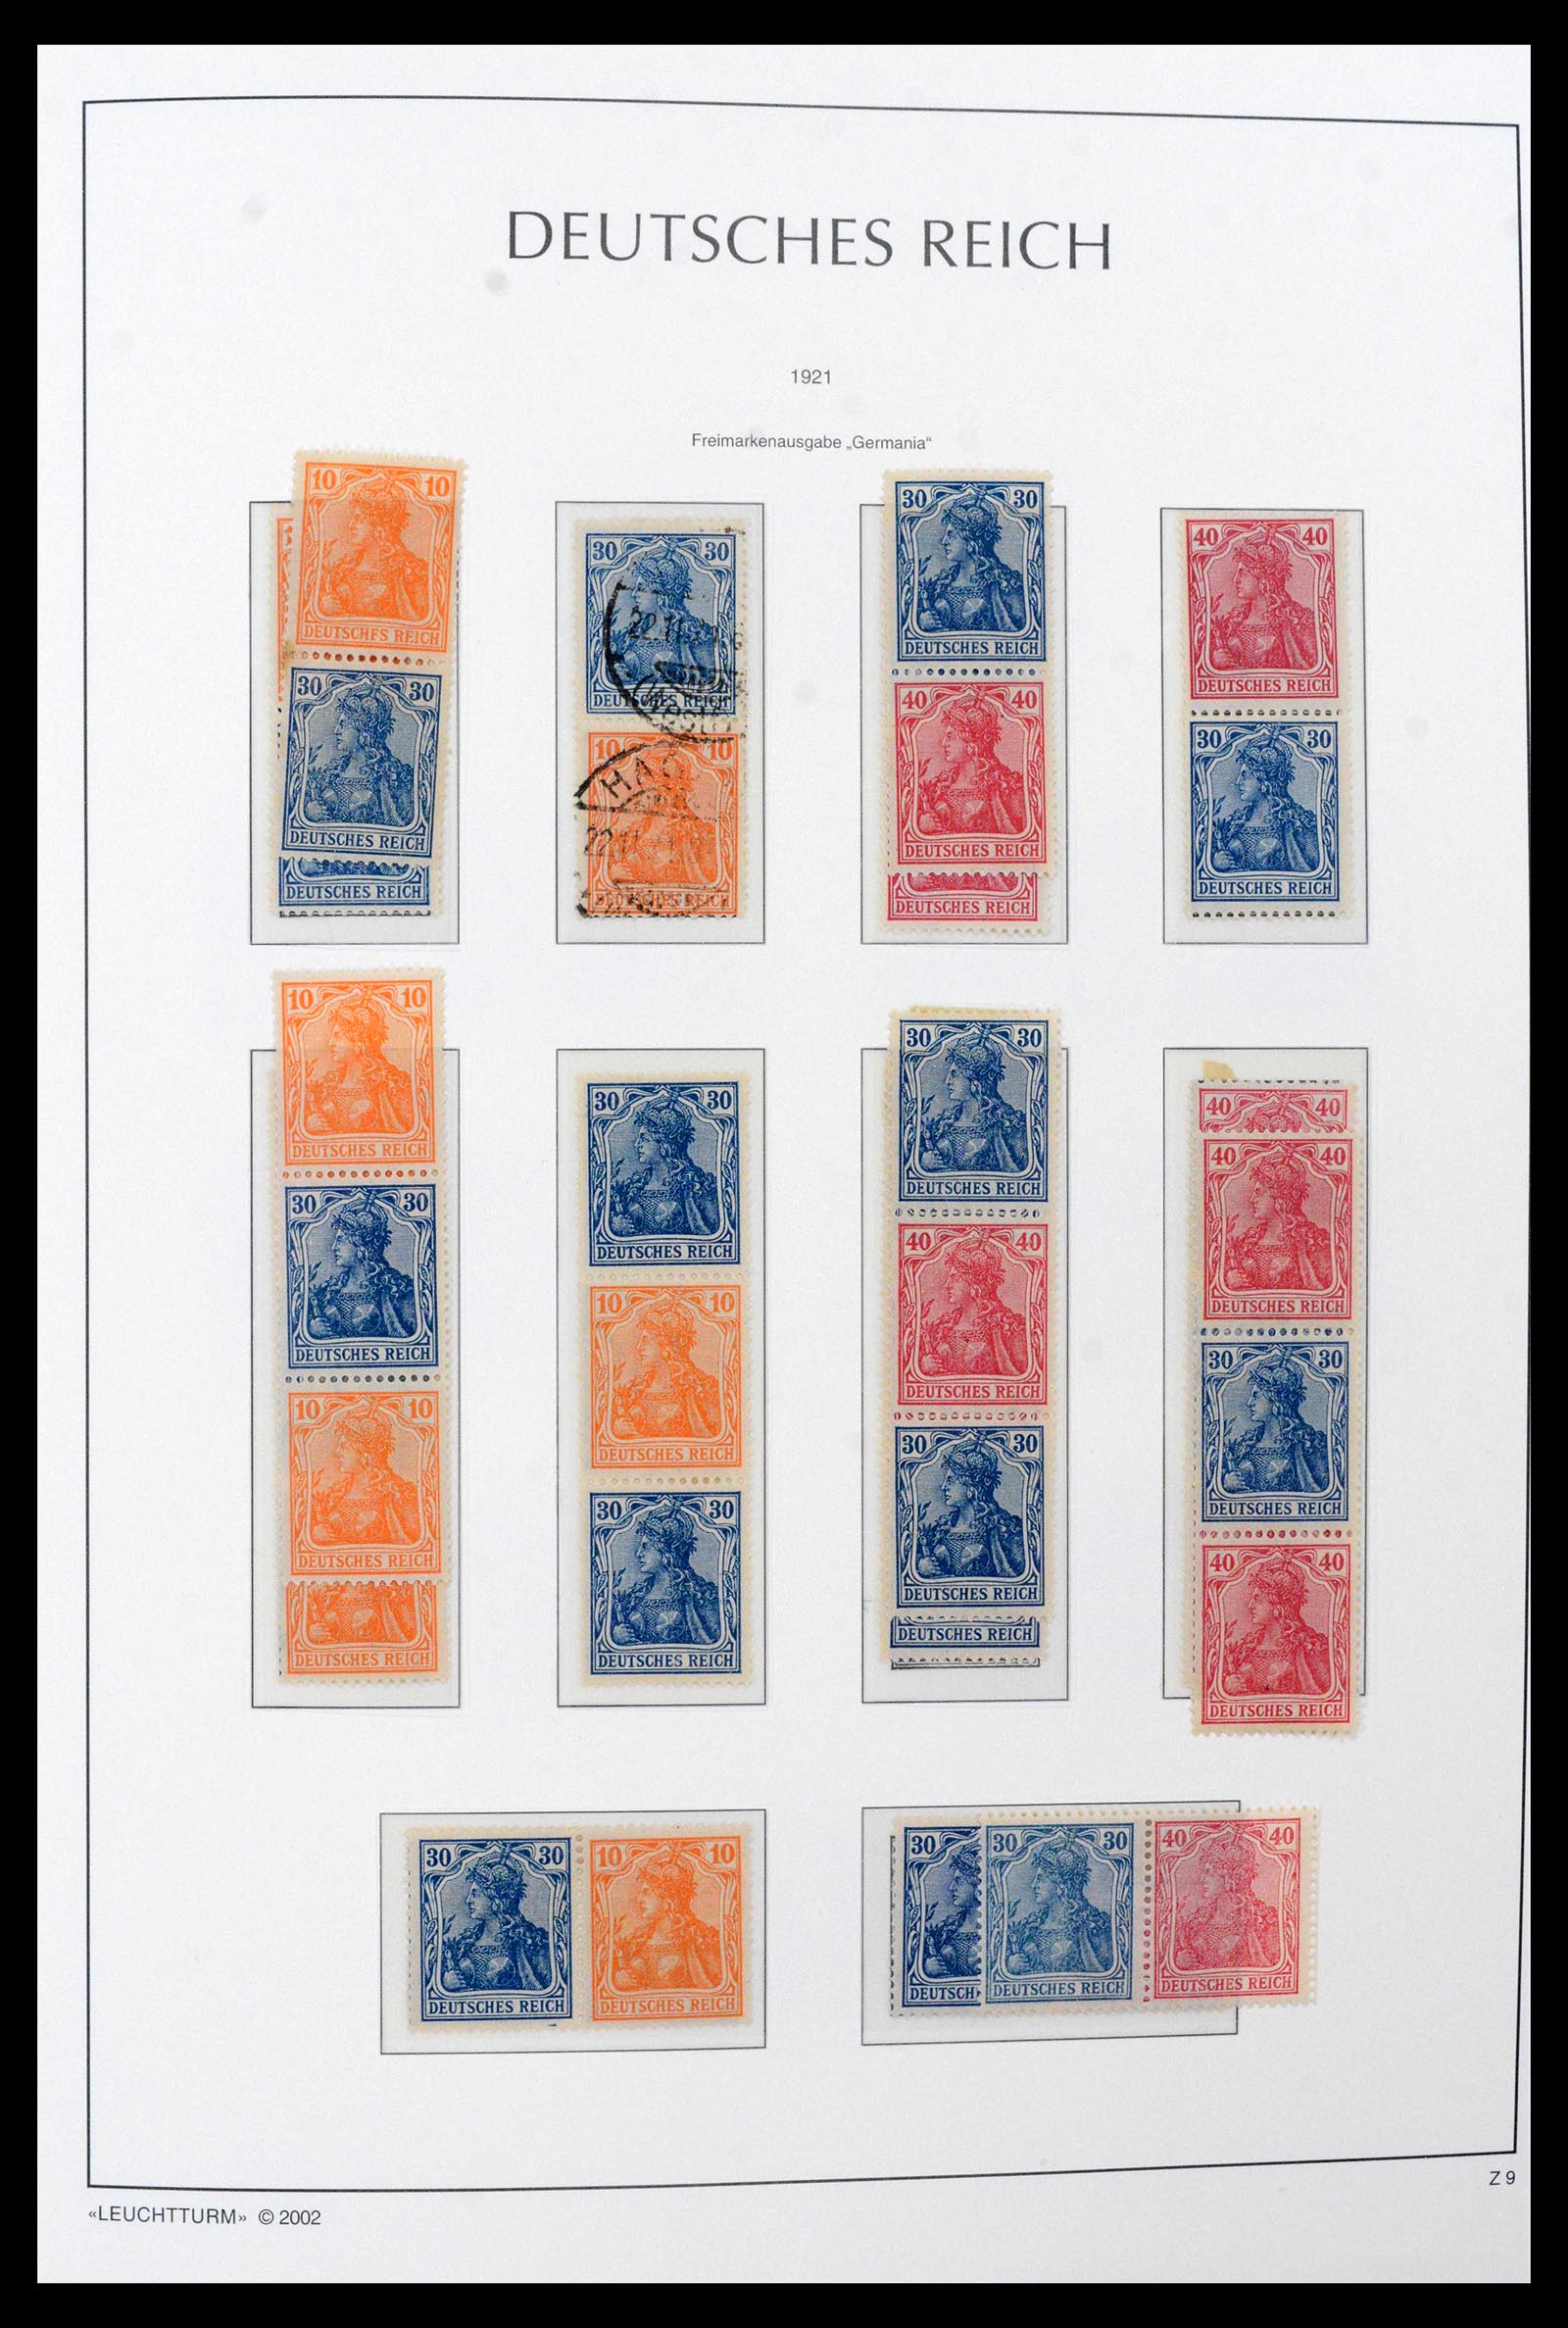 39045 0005 - Stamp collection 39045 German Reich combinations 1913-1941.